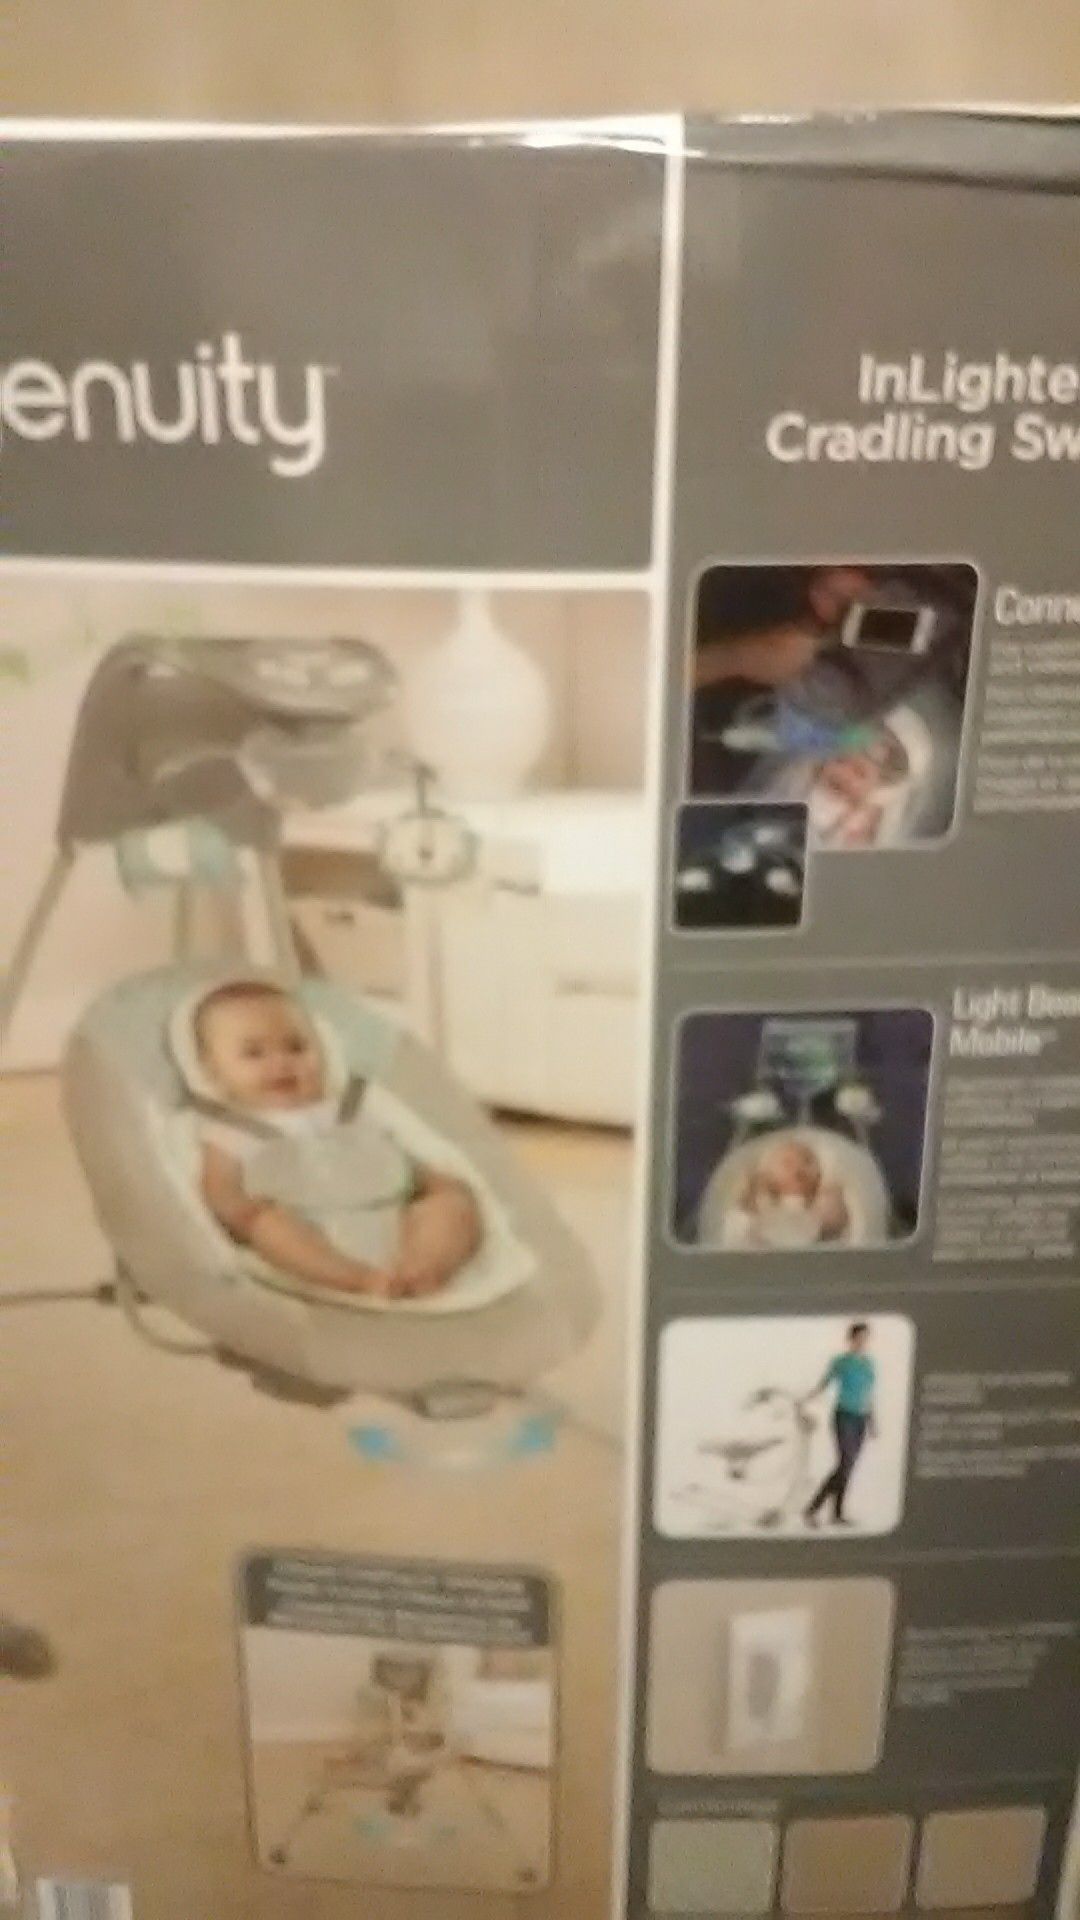 Ingenuity in lighten cradling swing with connect me lights music toys entertain baby